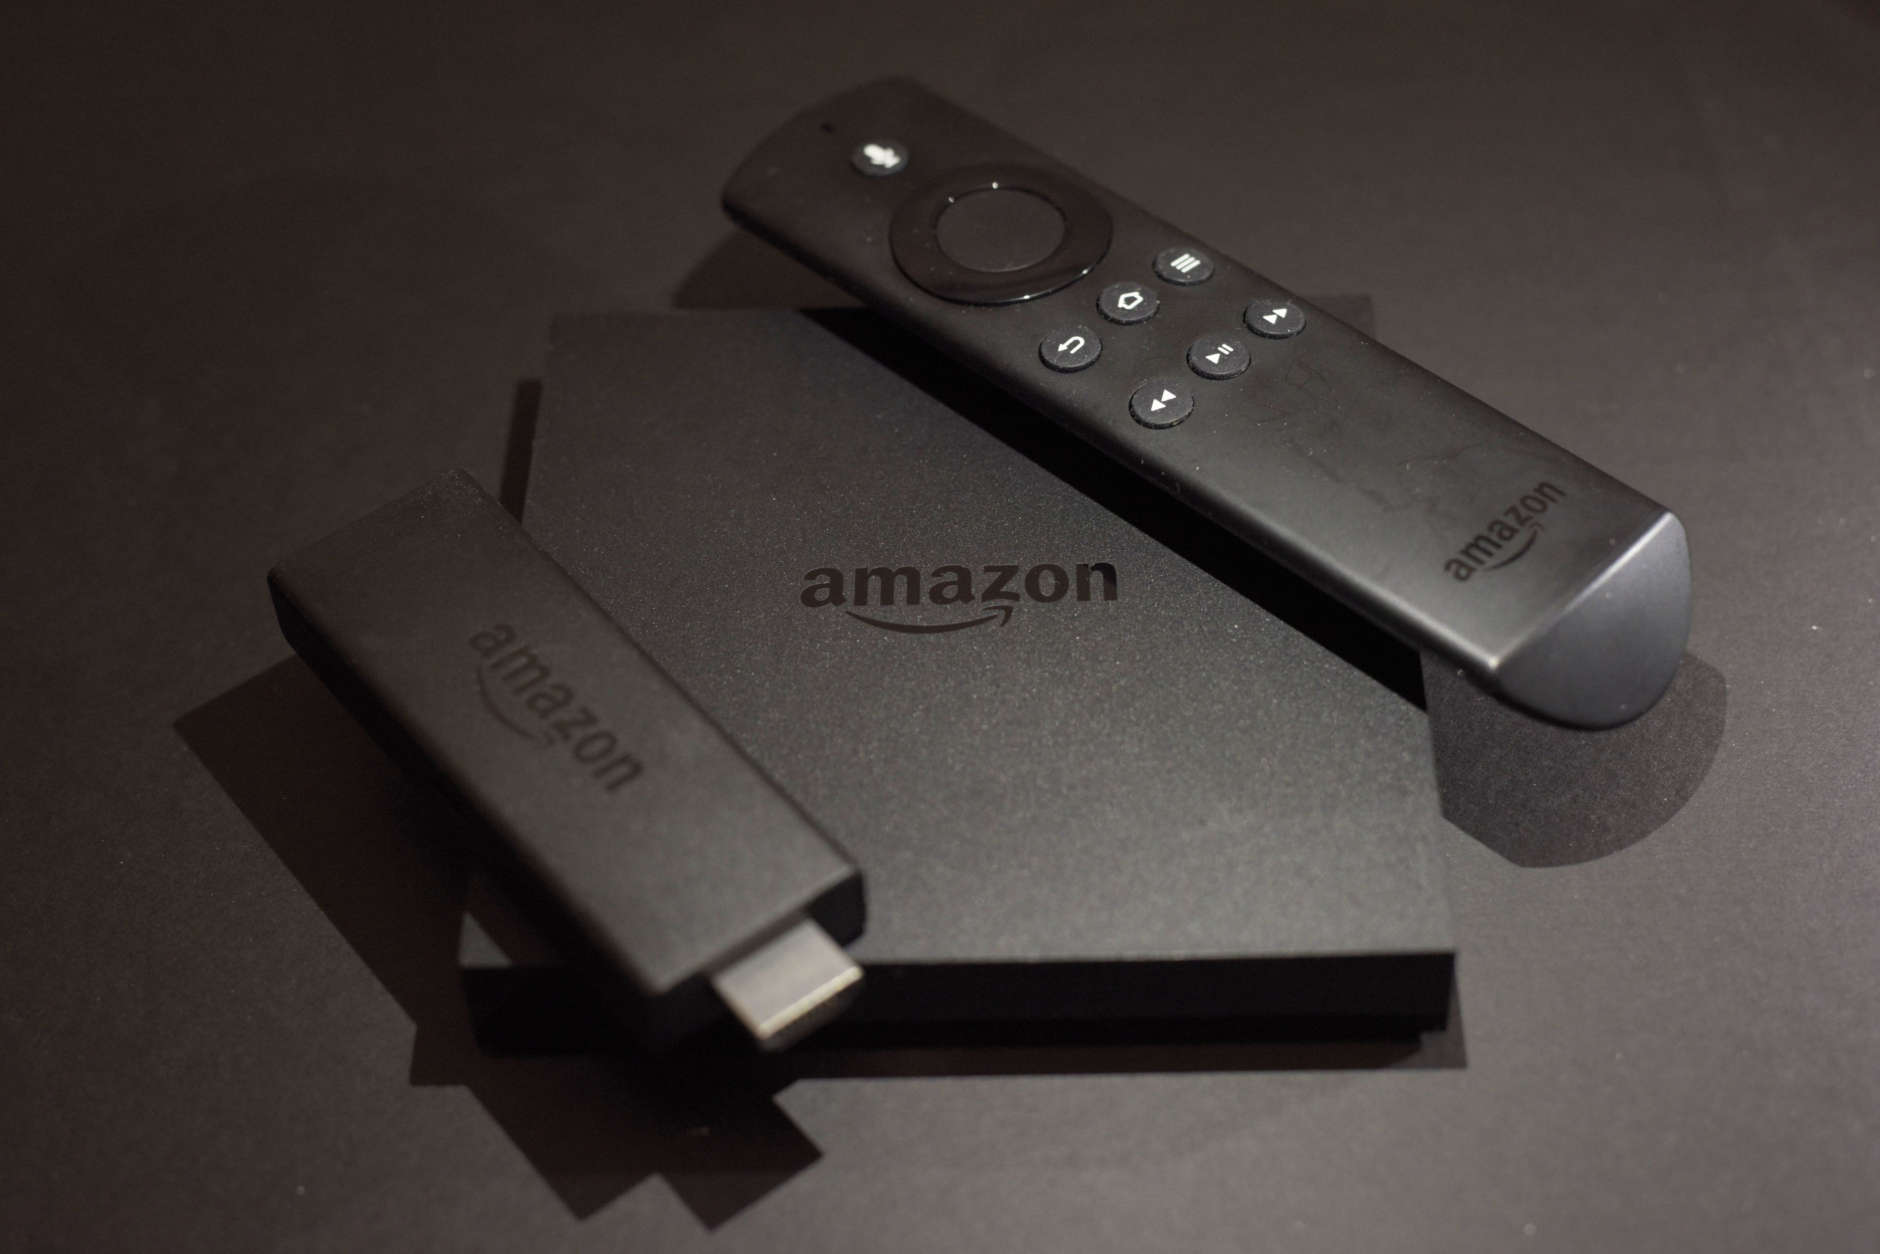 This Wednesday, Nov. 16, 2016 photo shows the Amazon Fire TV, center, and Fire TV Stick, left, streaming TV devices in New York. Your streaming TV options just got better and cheaper. Features that once required a $100 device can now be had for as little as $30. A cheap device is fine for getting TV shows and movies from most popular services onto a big-screen TV, as long as it’s a regular, high-definition set.(AP Photo)